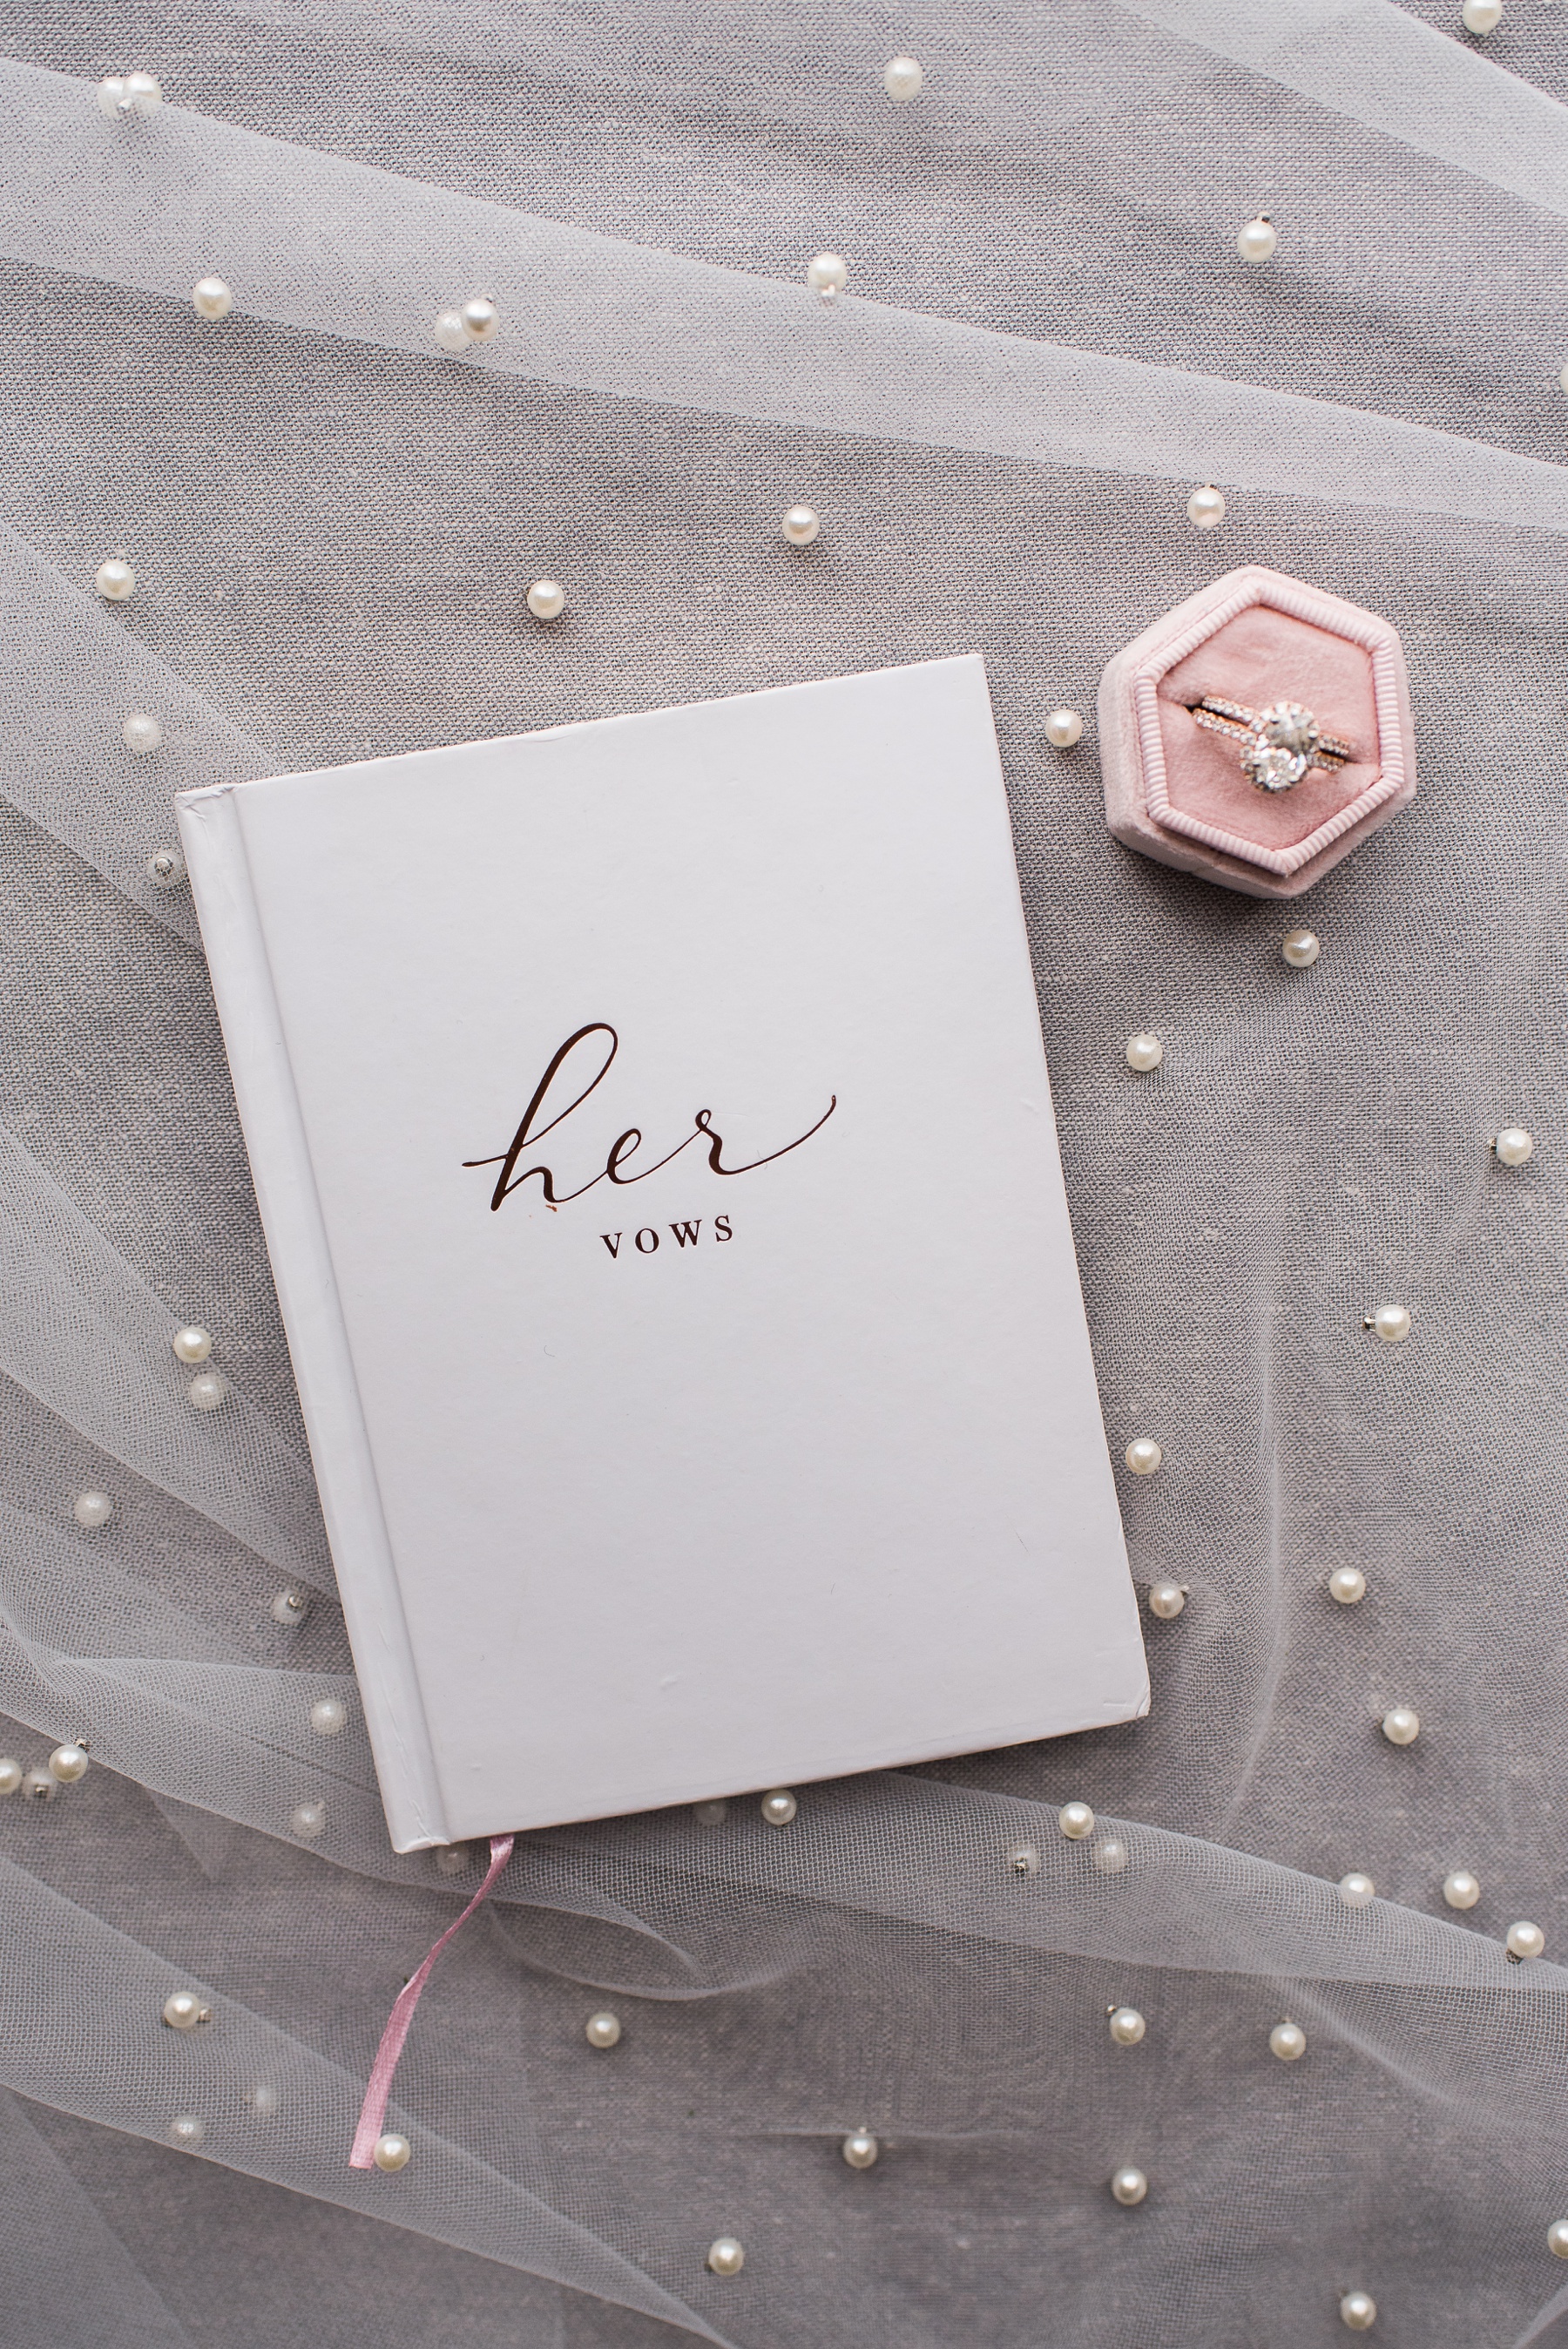 Her Vow book and ring in pink ring box. 